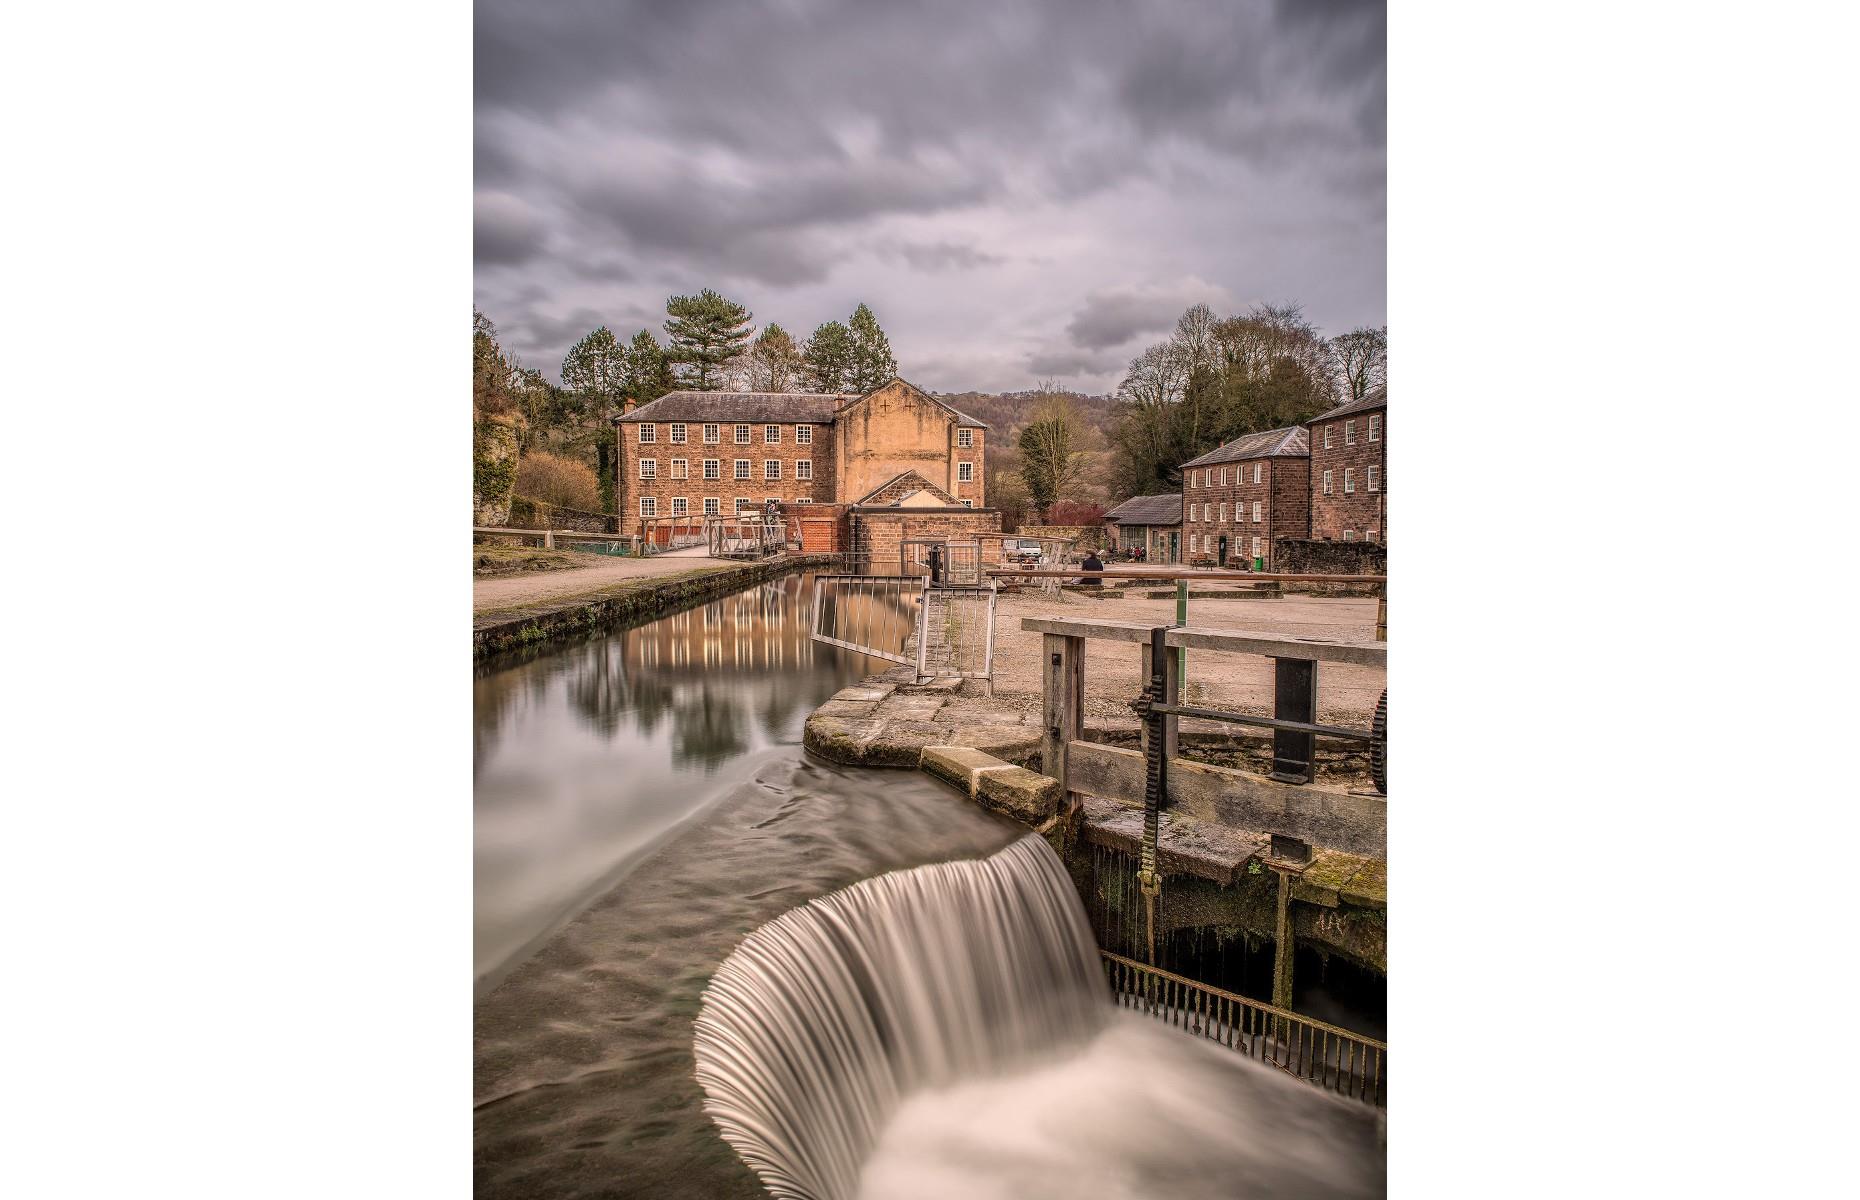 The world's first water-powered cotton spinning mill, Cromford Mill was built on the bank of the River Derwent in 1771 and is one of Britain's most important industrial landmarks. It served as the home of Sir Richard Arkwright, an English inventor and a leading entrepreneur during the early Industrial Revolution. Photographed here by Mike Swain, the site looks especially eye-catching against a gloomy sky.